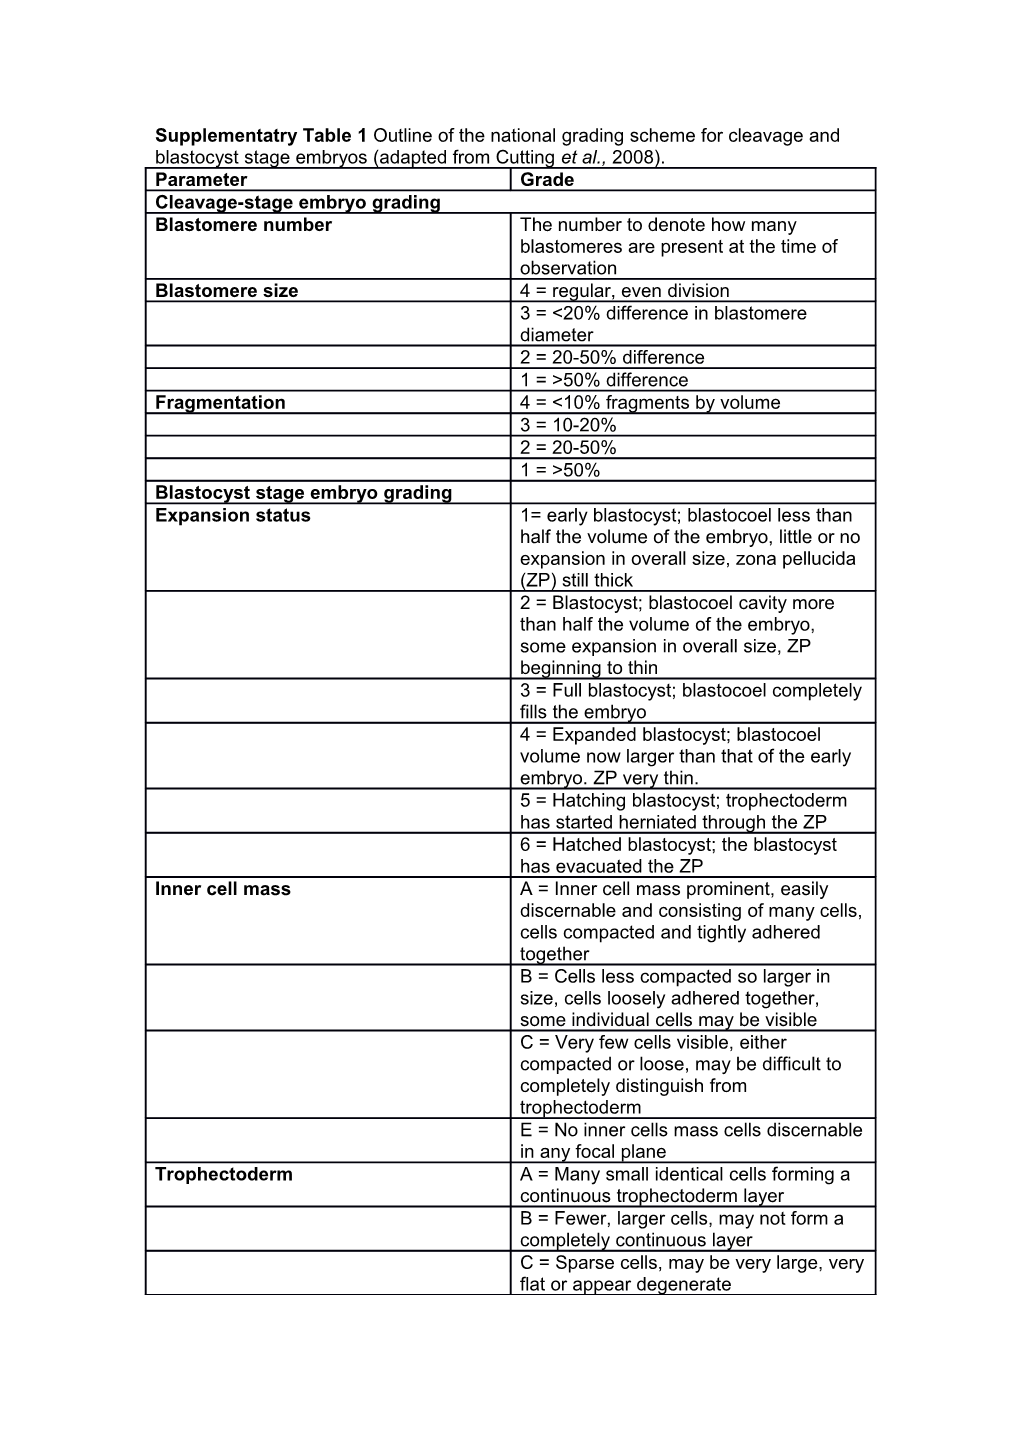 Supplementatry Table 1 Outline of the National Grading Scheme for Cleavage and Blastocyst